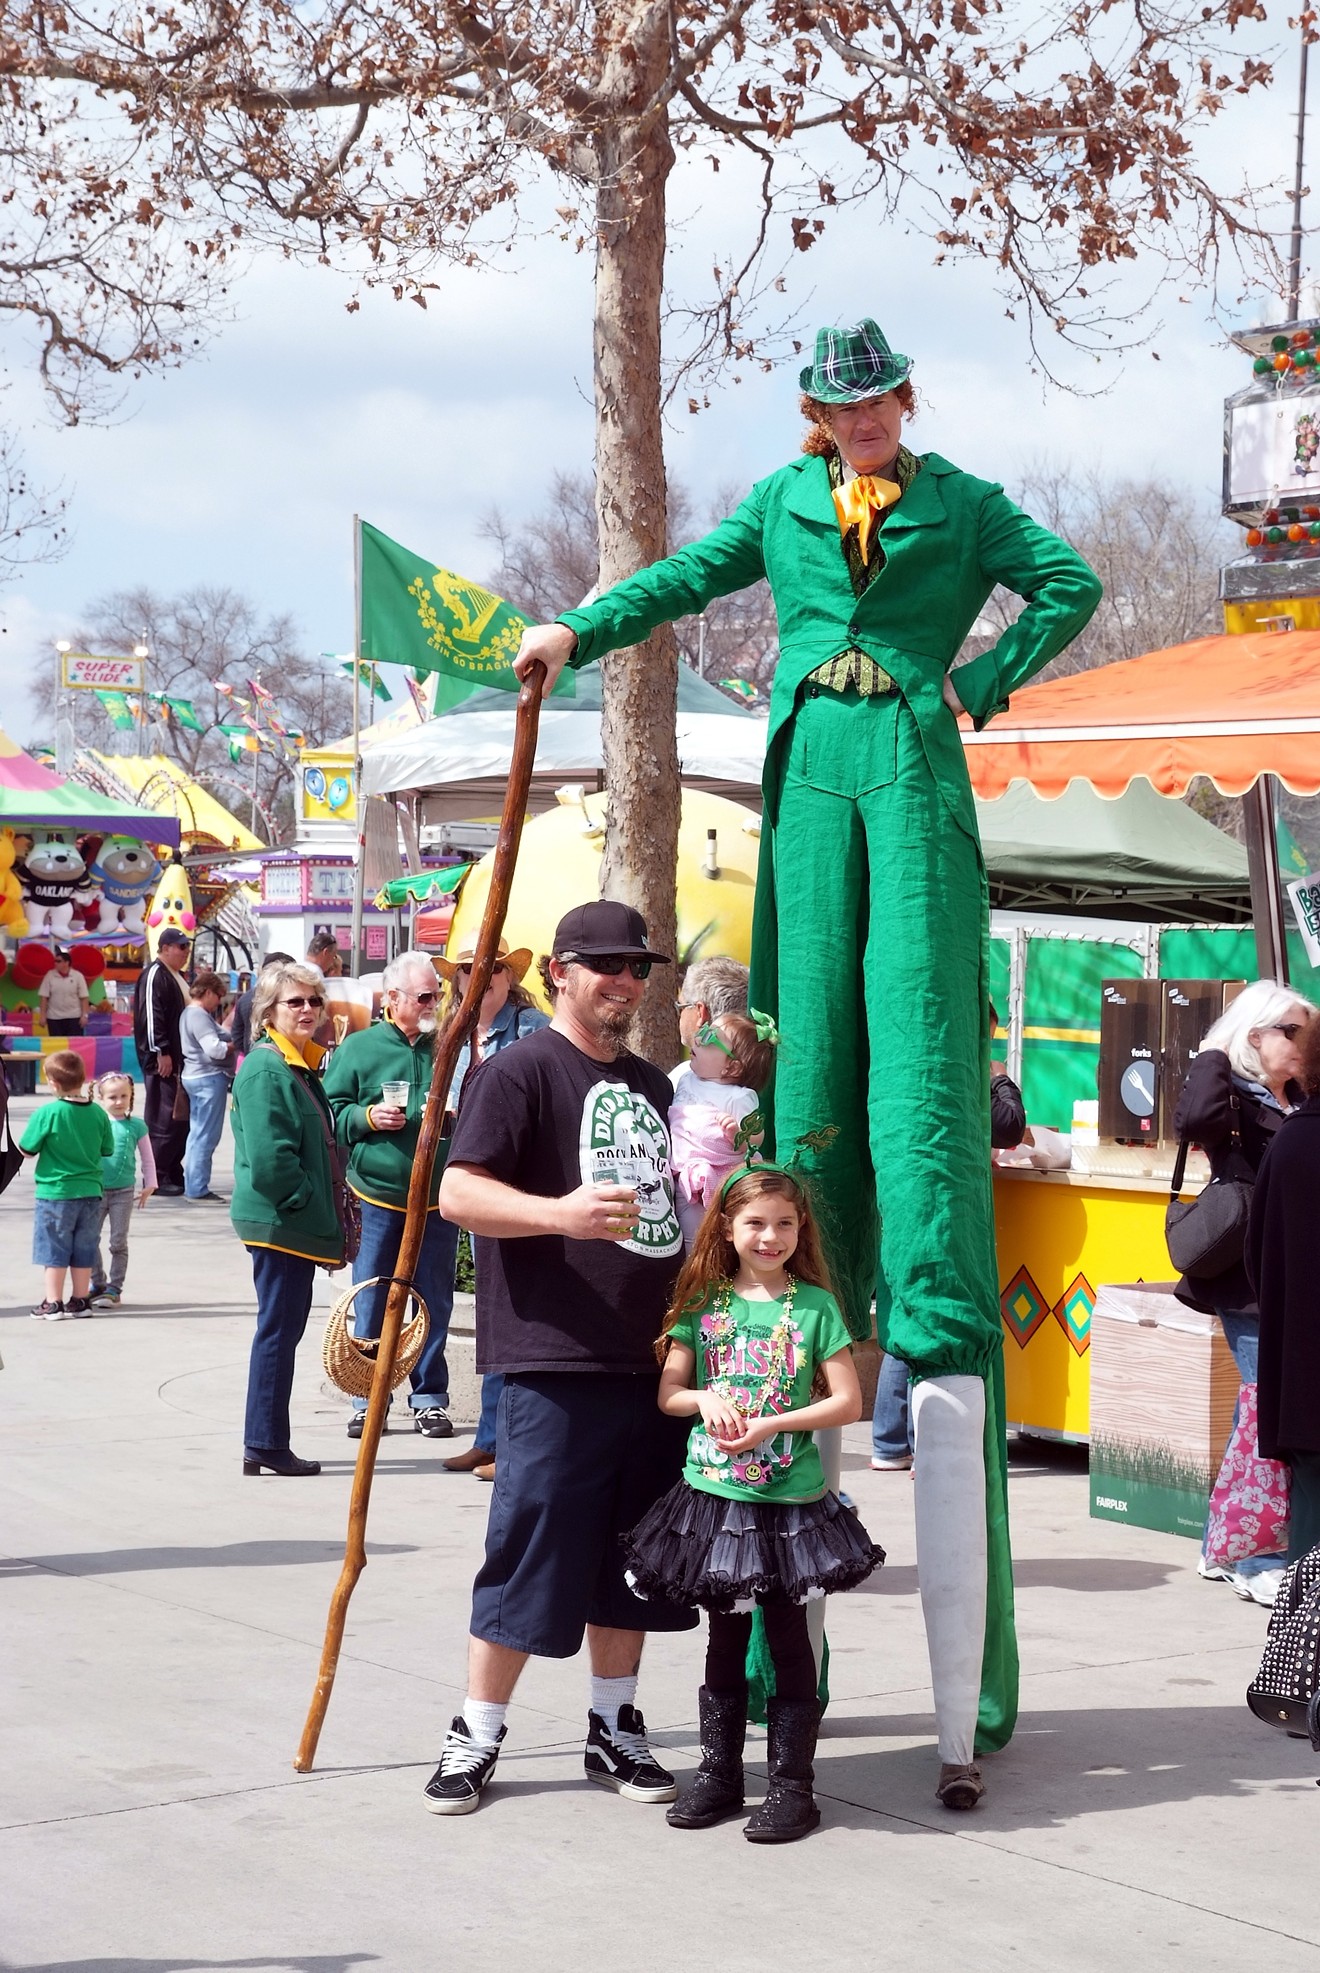 Meet Rusty O'Flattery, the world's tallest leprechaun, at this weekend's International Celtic Music and Microbrew Festival.